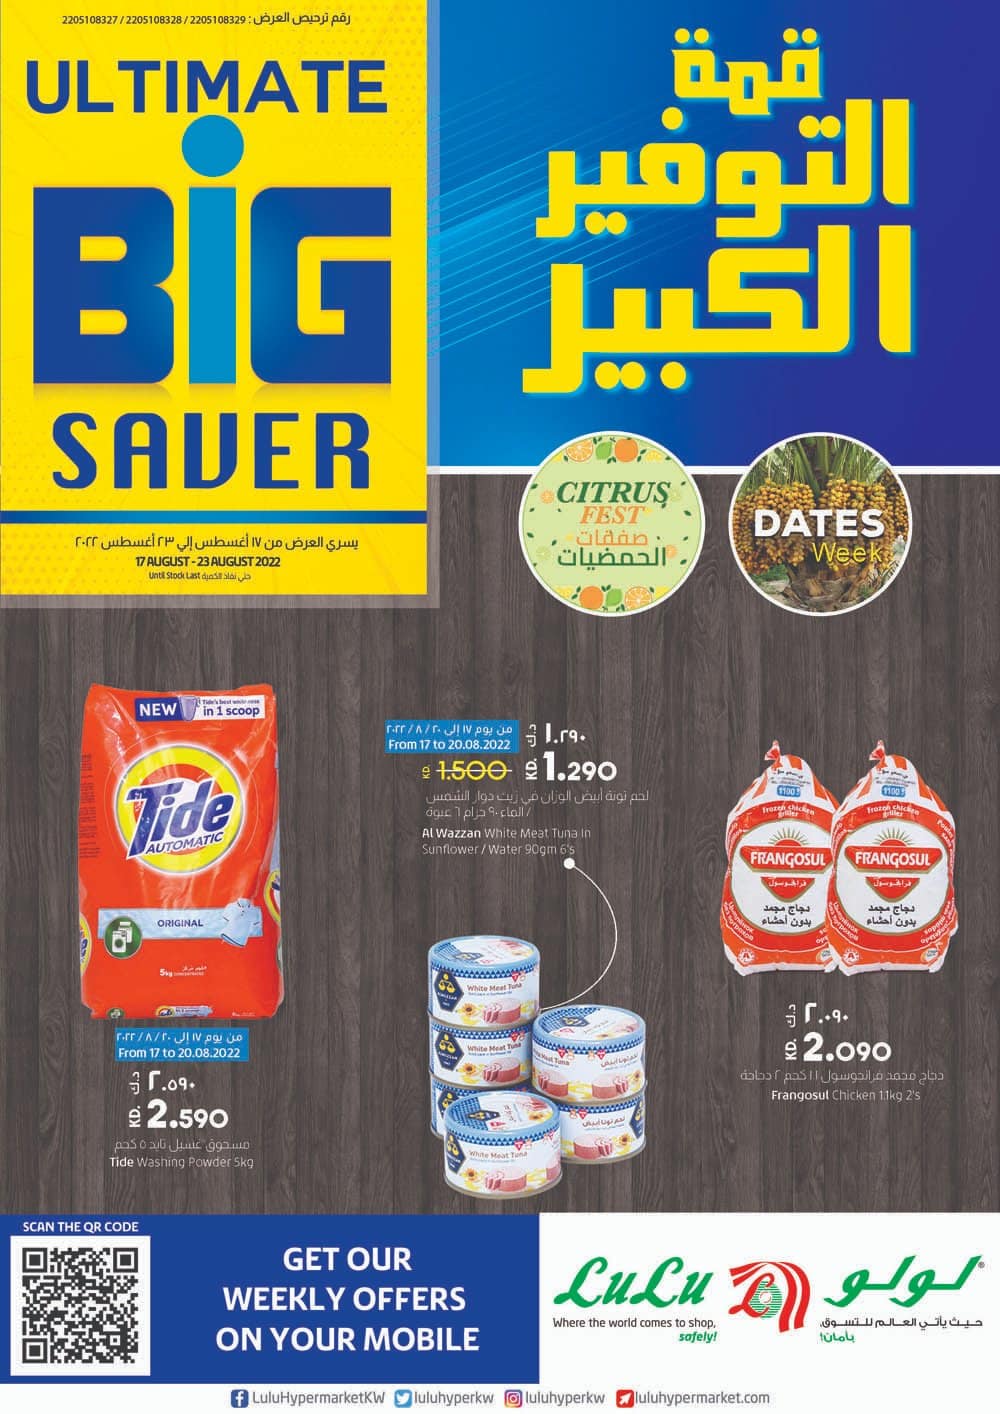 Lulu Sale Ultimate Big Saver offers up to 23rd August, Lulu Promotions 